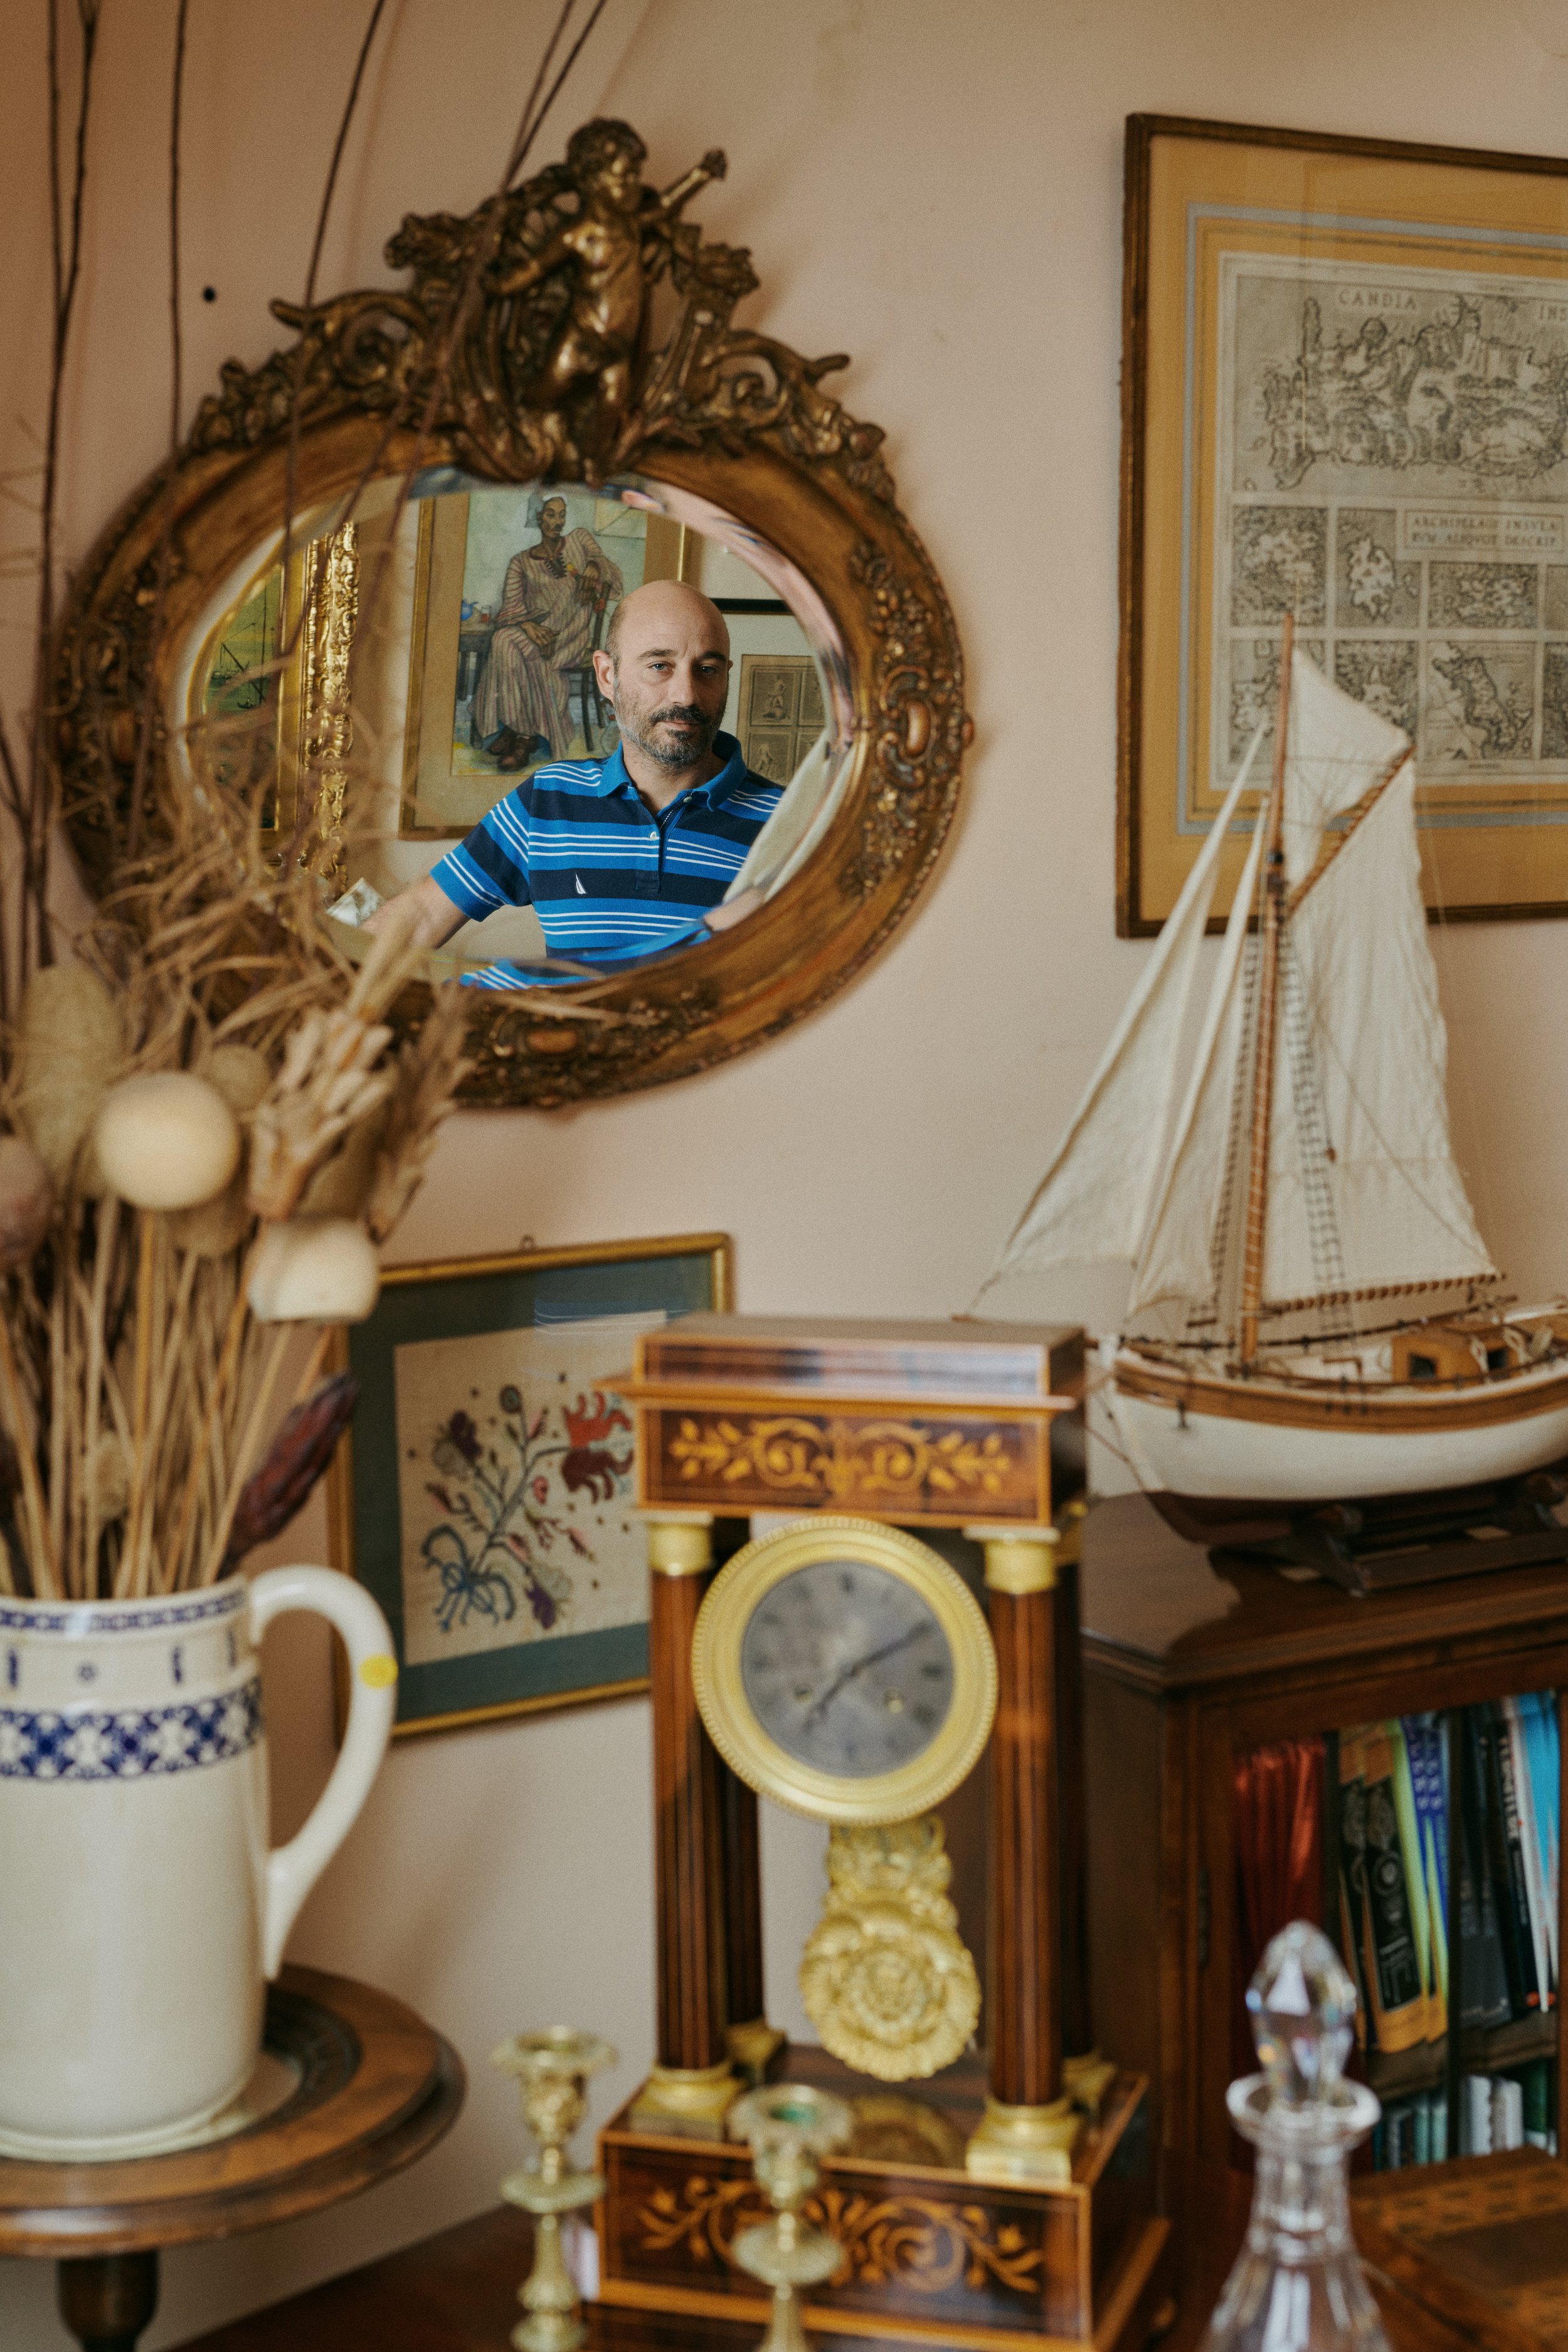   &nbsp;George Vithoulkas pictured within the antique store on Erechthiou street  